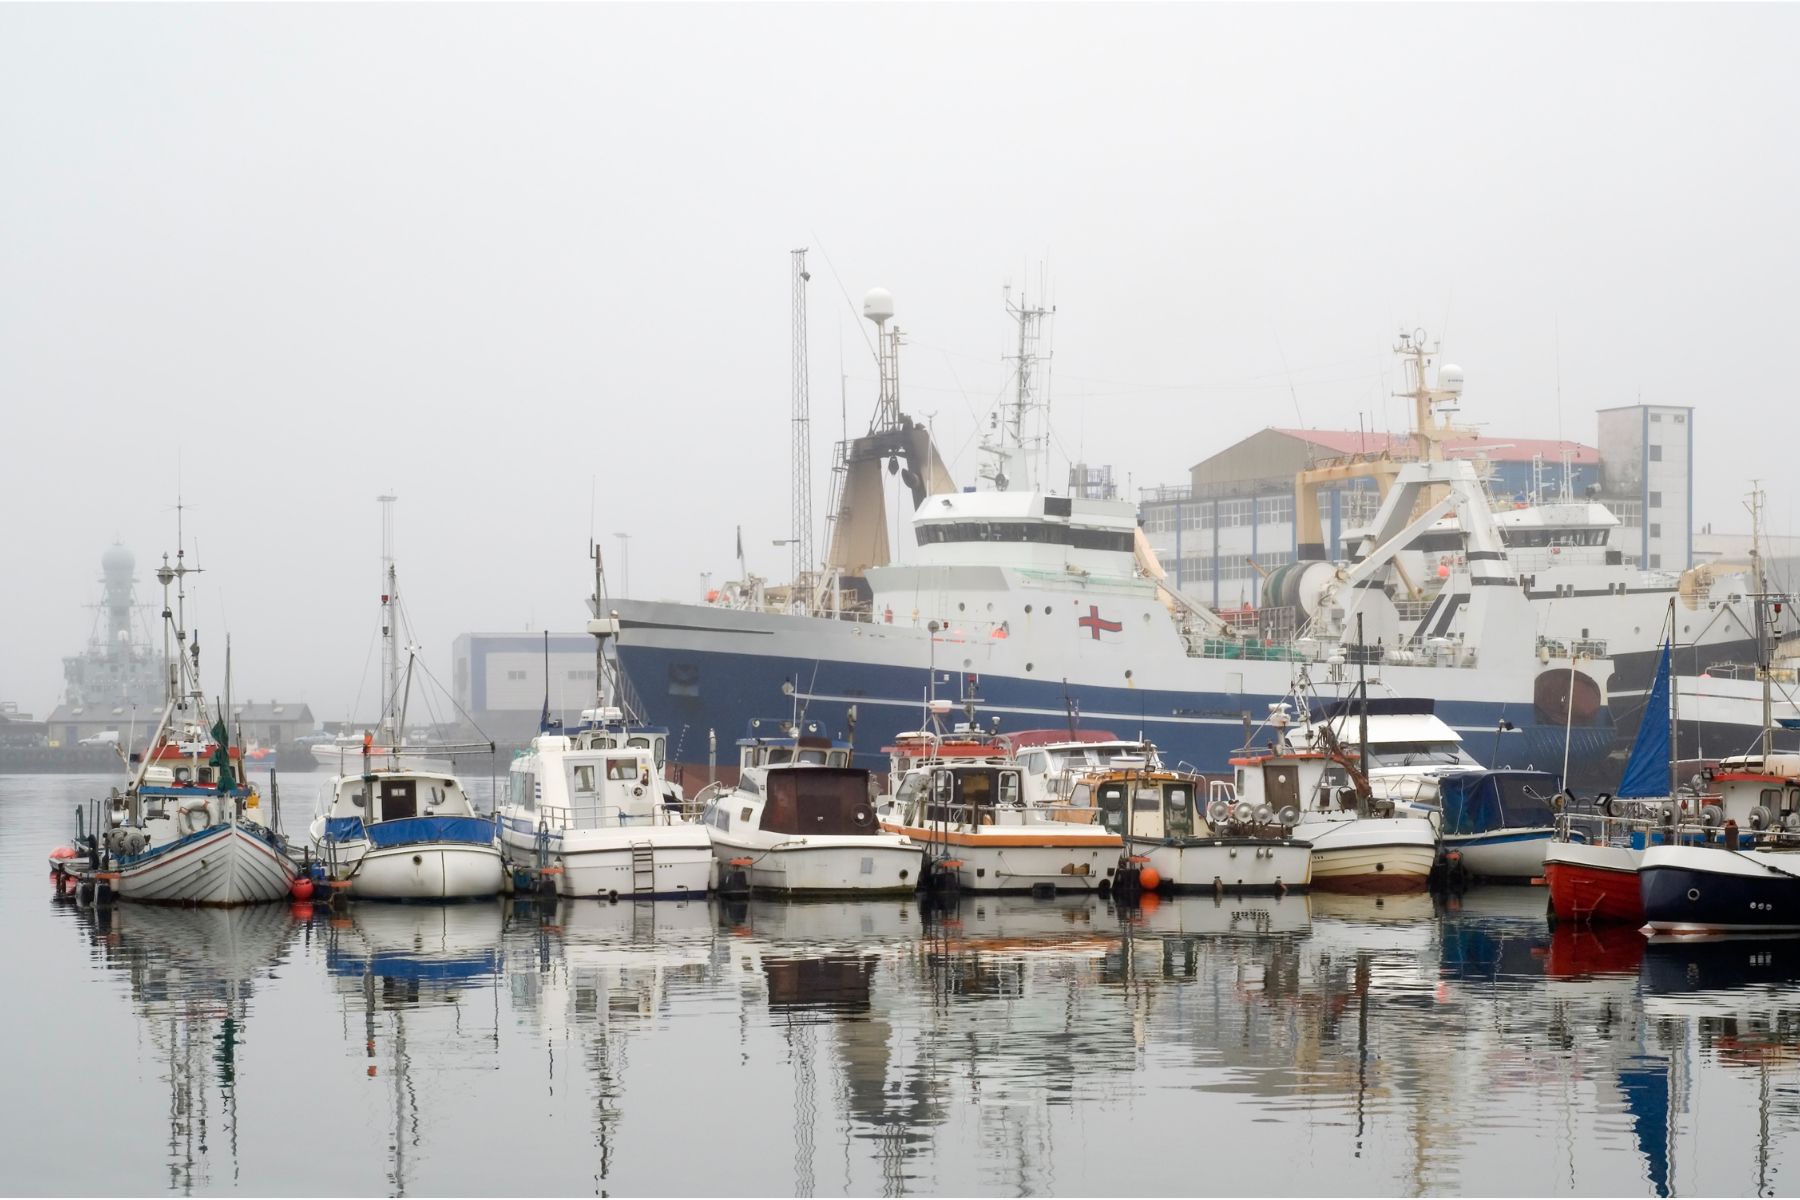 Foggy photograph of Torshavn, captial city and busiest port of the Faroe Islands.